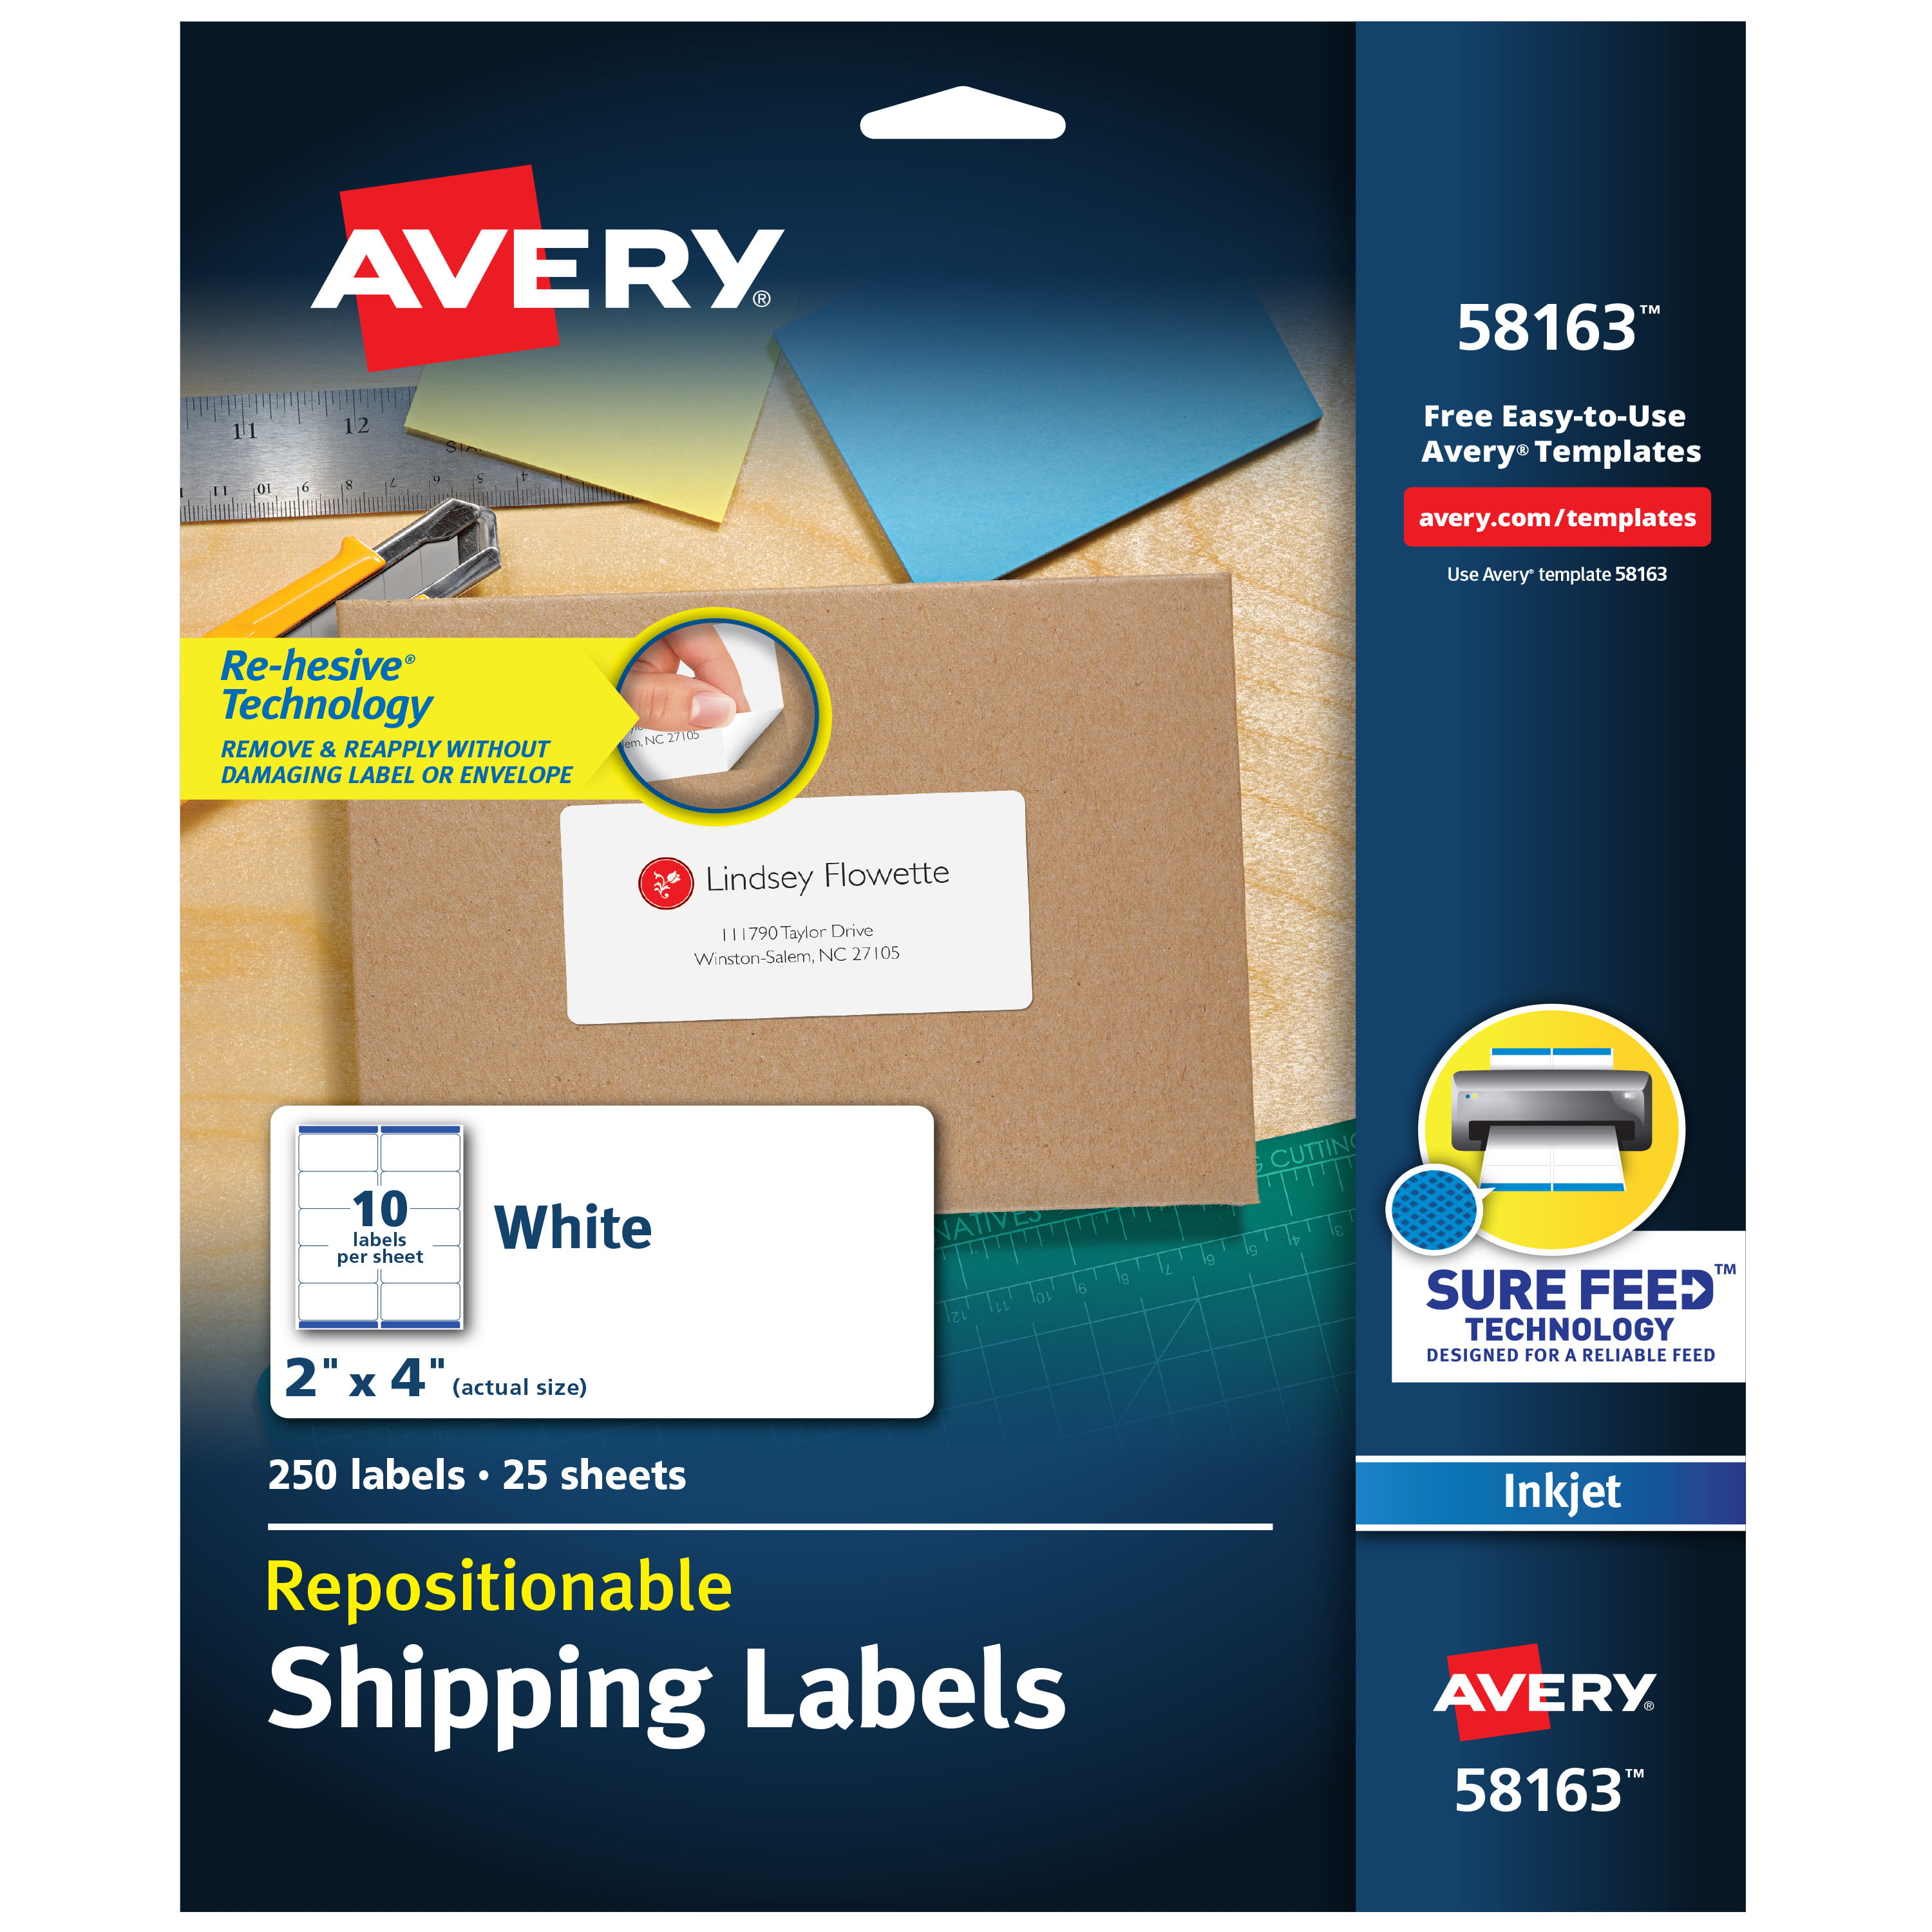 avery-5163-template-download